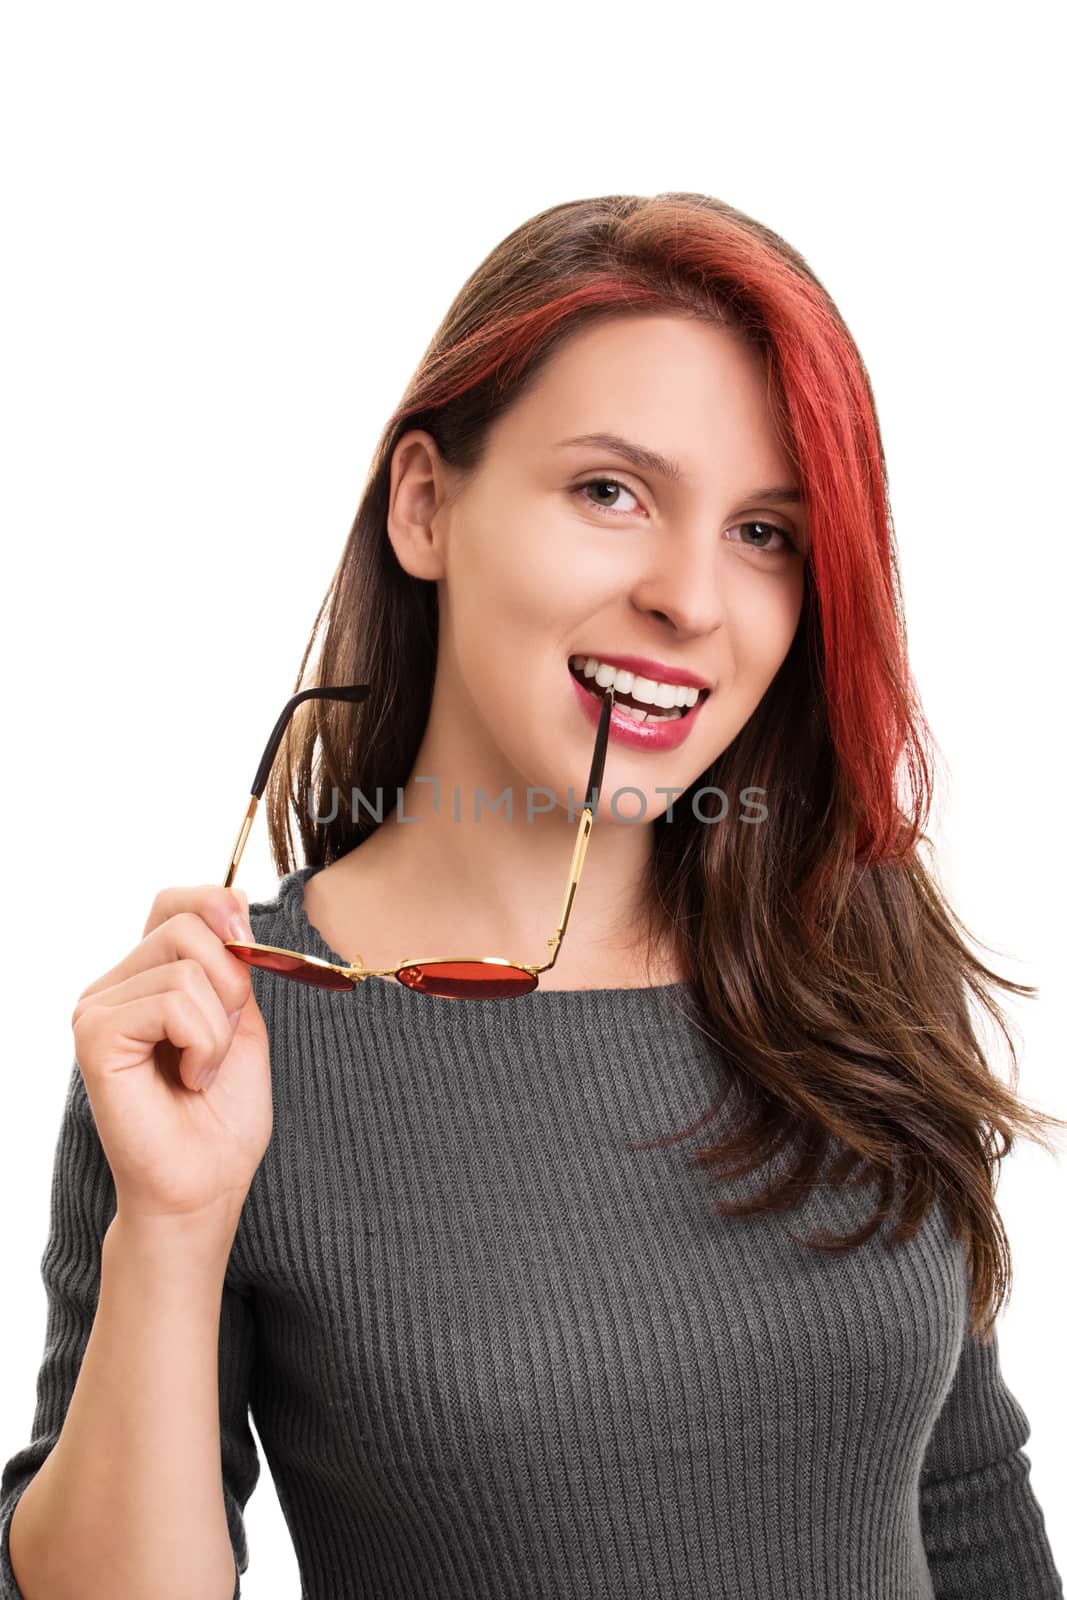 Close up portrait of a smiling beautiful young woman biting the shackle of sunglasses, looking at the camera, isolated on white background. Beautiful smiling girl with a shackle of sunglasses in her mouth.